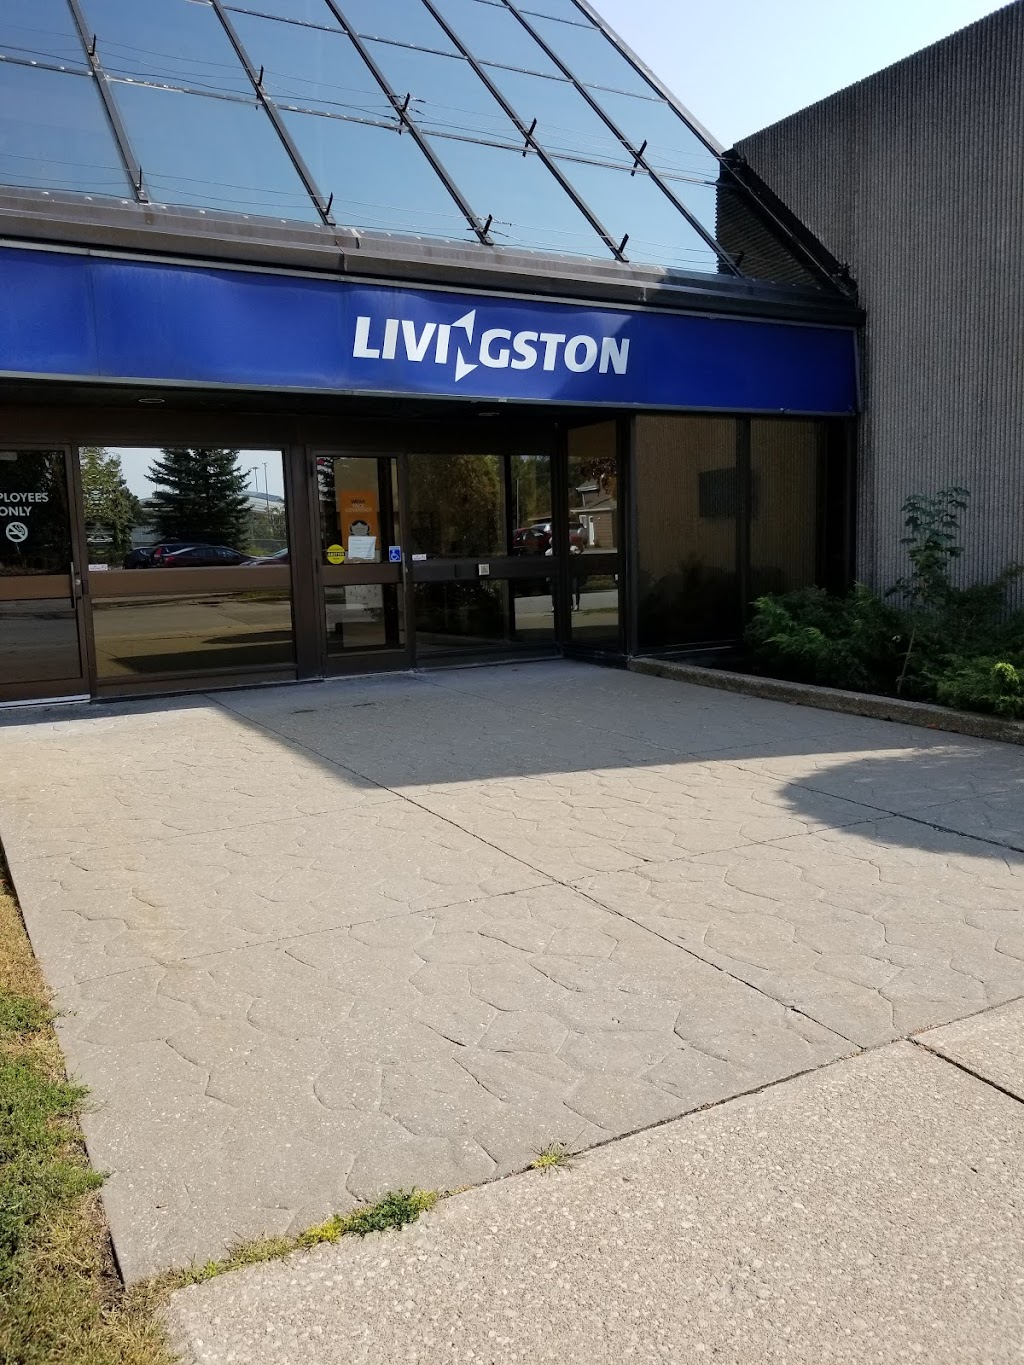 Livingston International | 36 Queen St, Fort Erie, ON L2A 0B5, Canada | Phone: (905) 871-6500